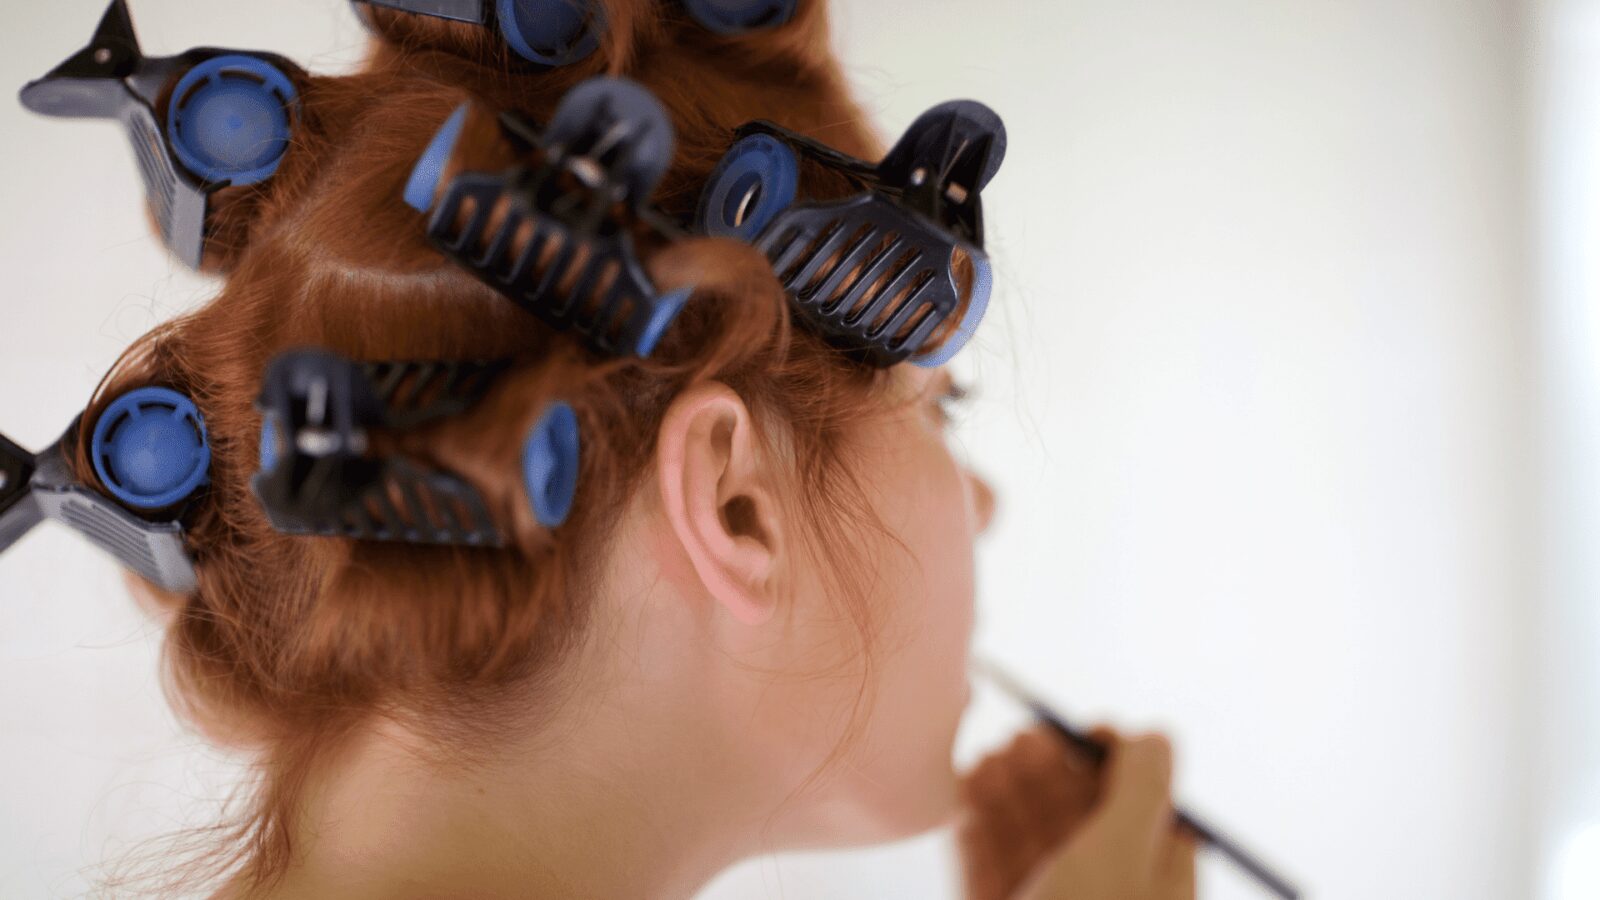 How Redheads Can Use Hair Rollers For The Perfect Curls